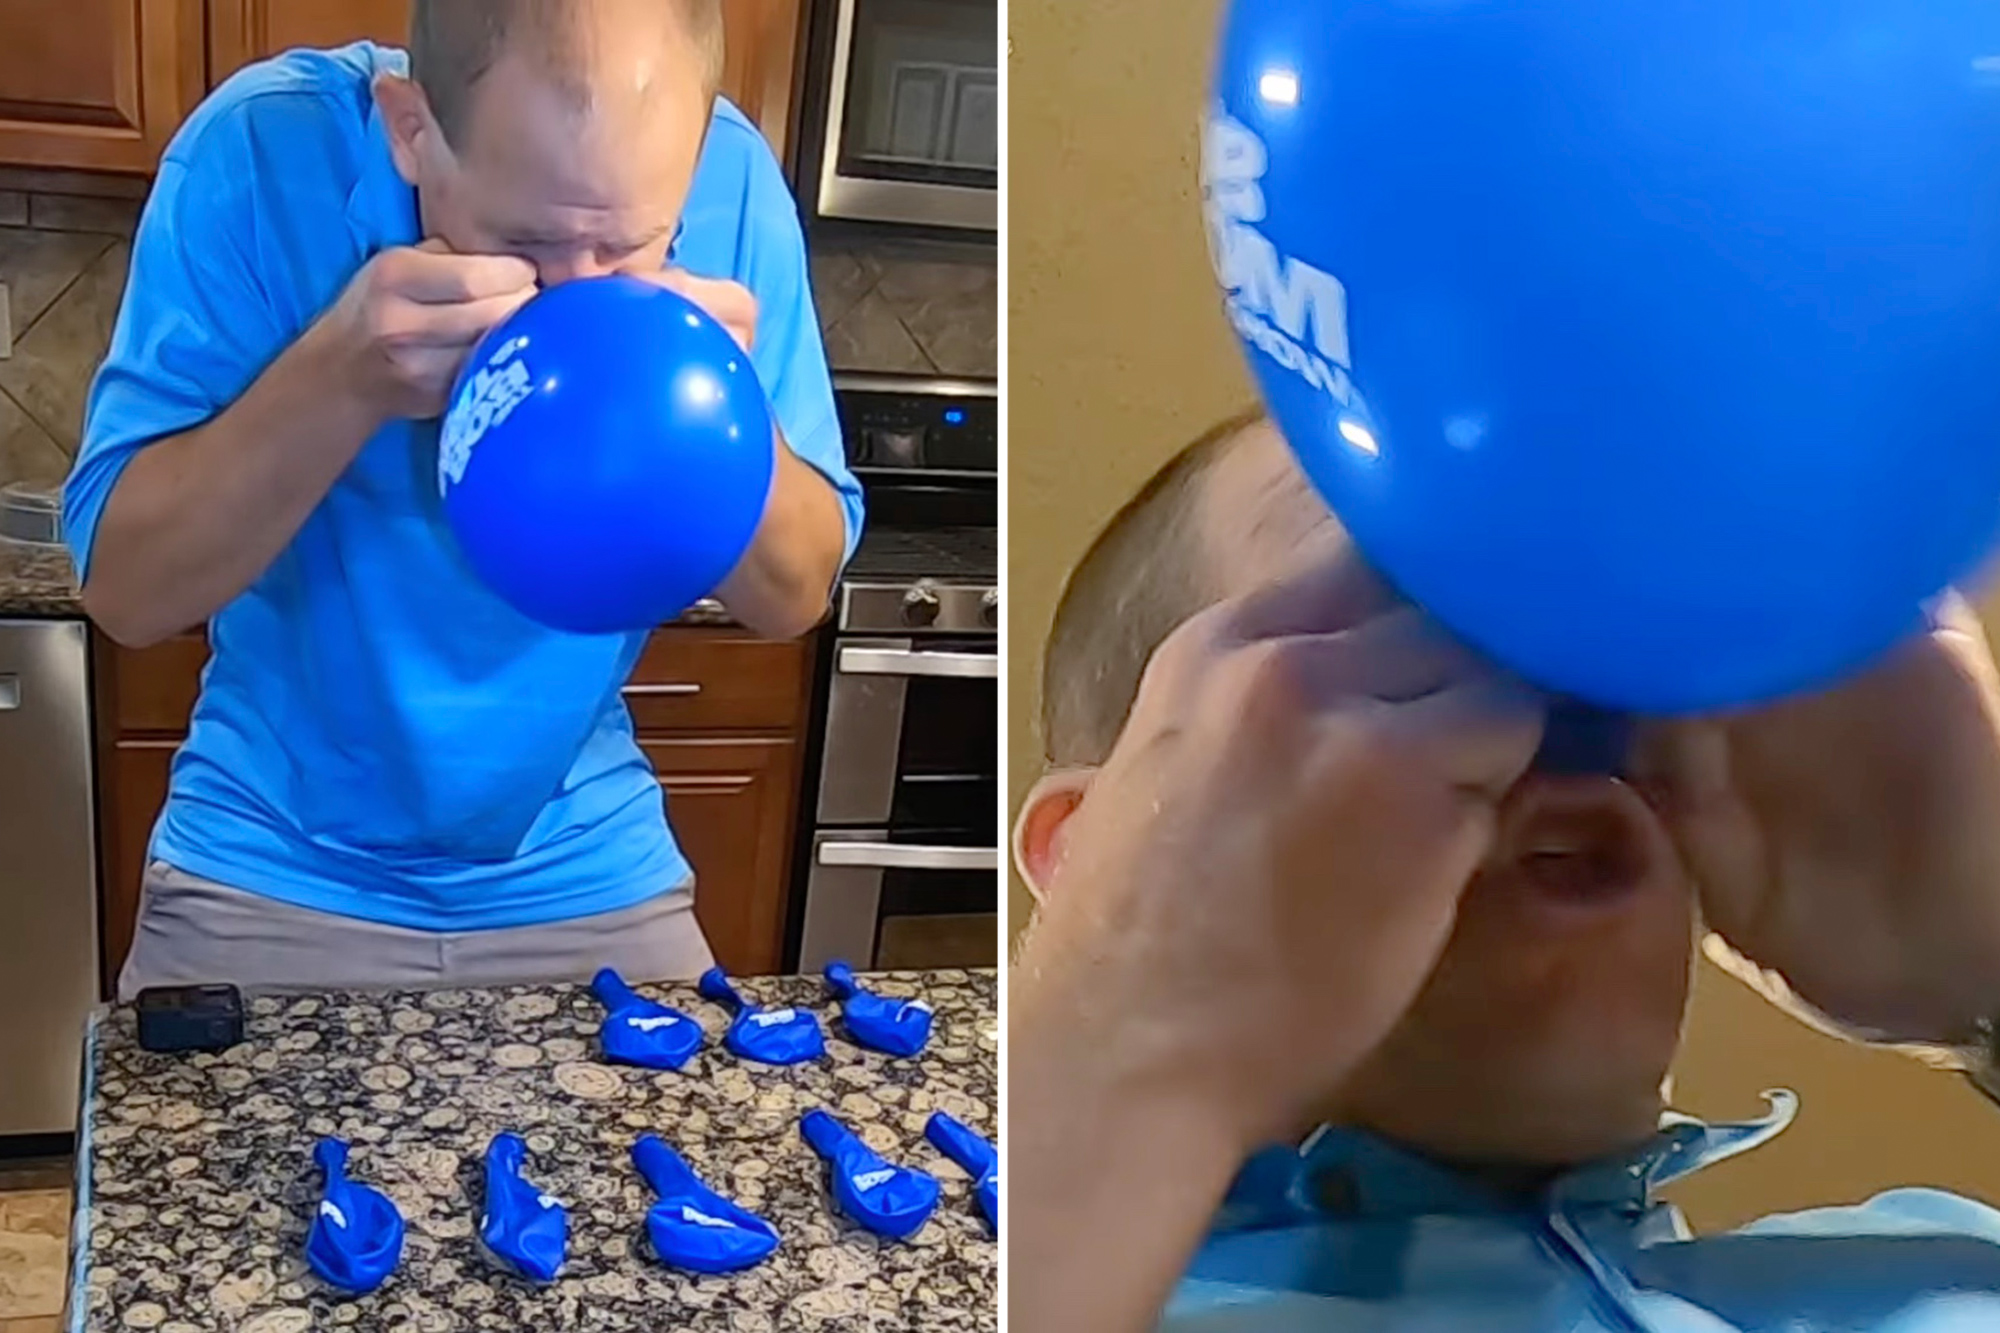 Idaho's David Rush set a new world record after using his nose to inflate 10 balloons in a minute.